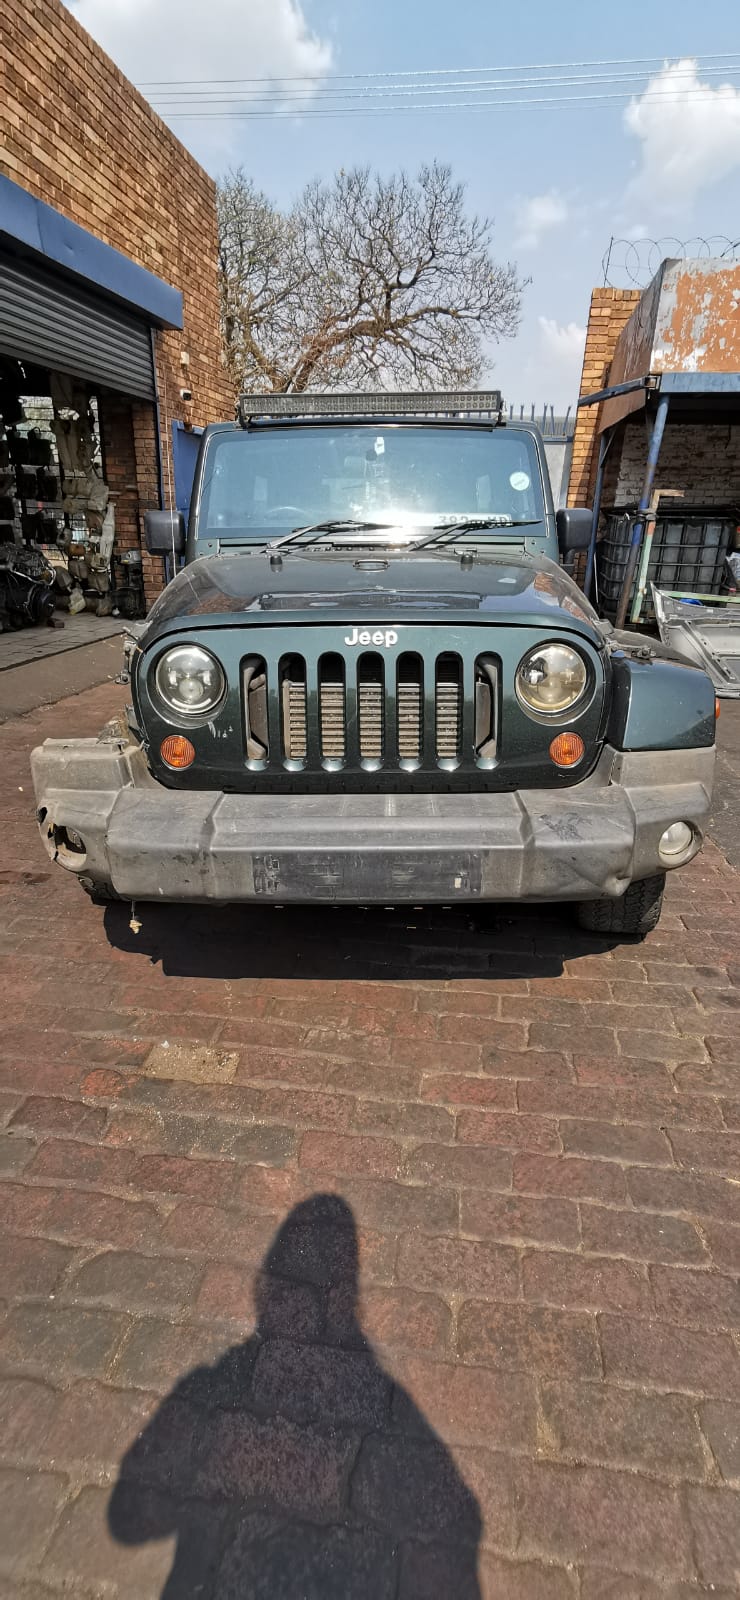 Jeep Wrangler JK 2008-2017 used body parts for sale | Junk Mail